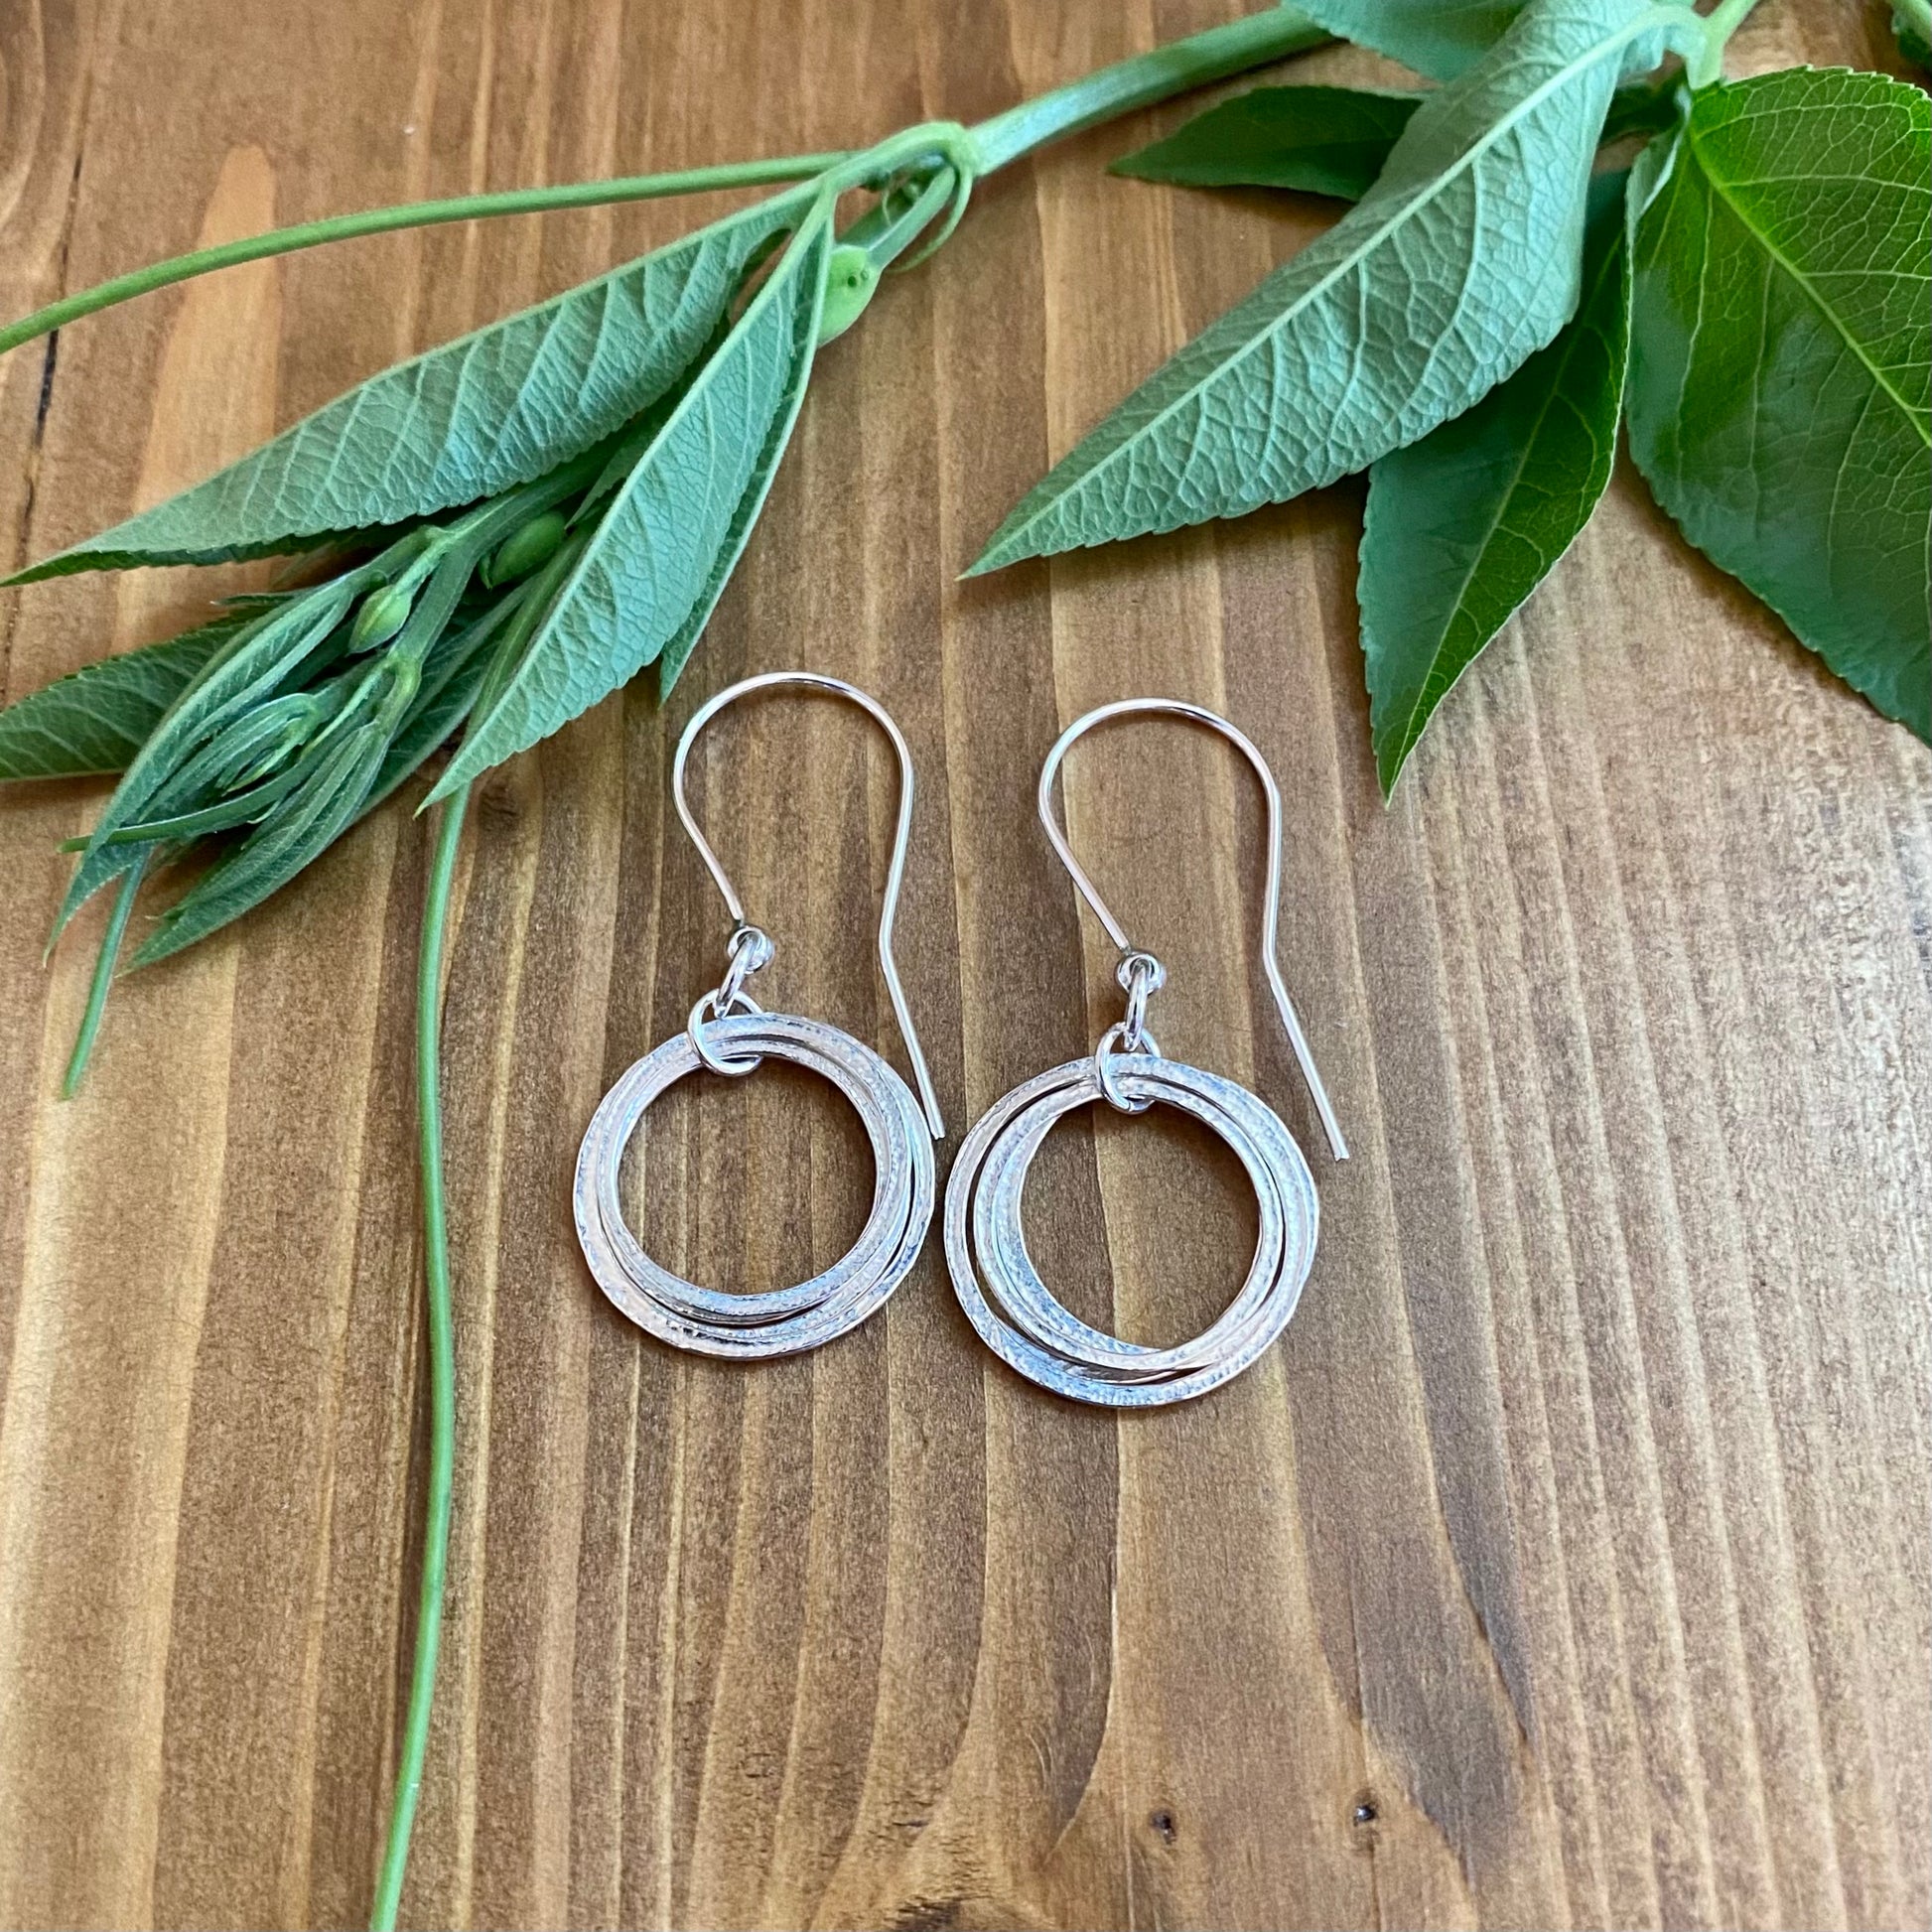 4 circle earrings for 40th birthday gift